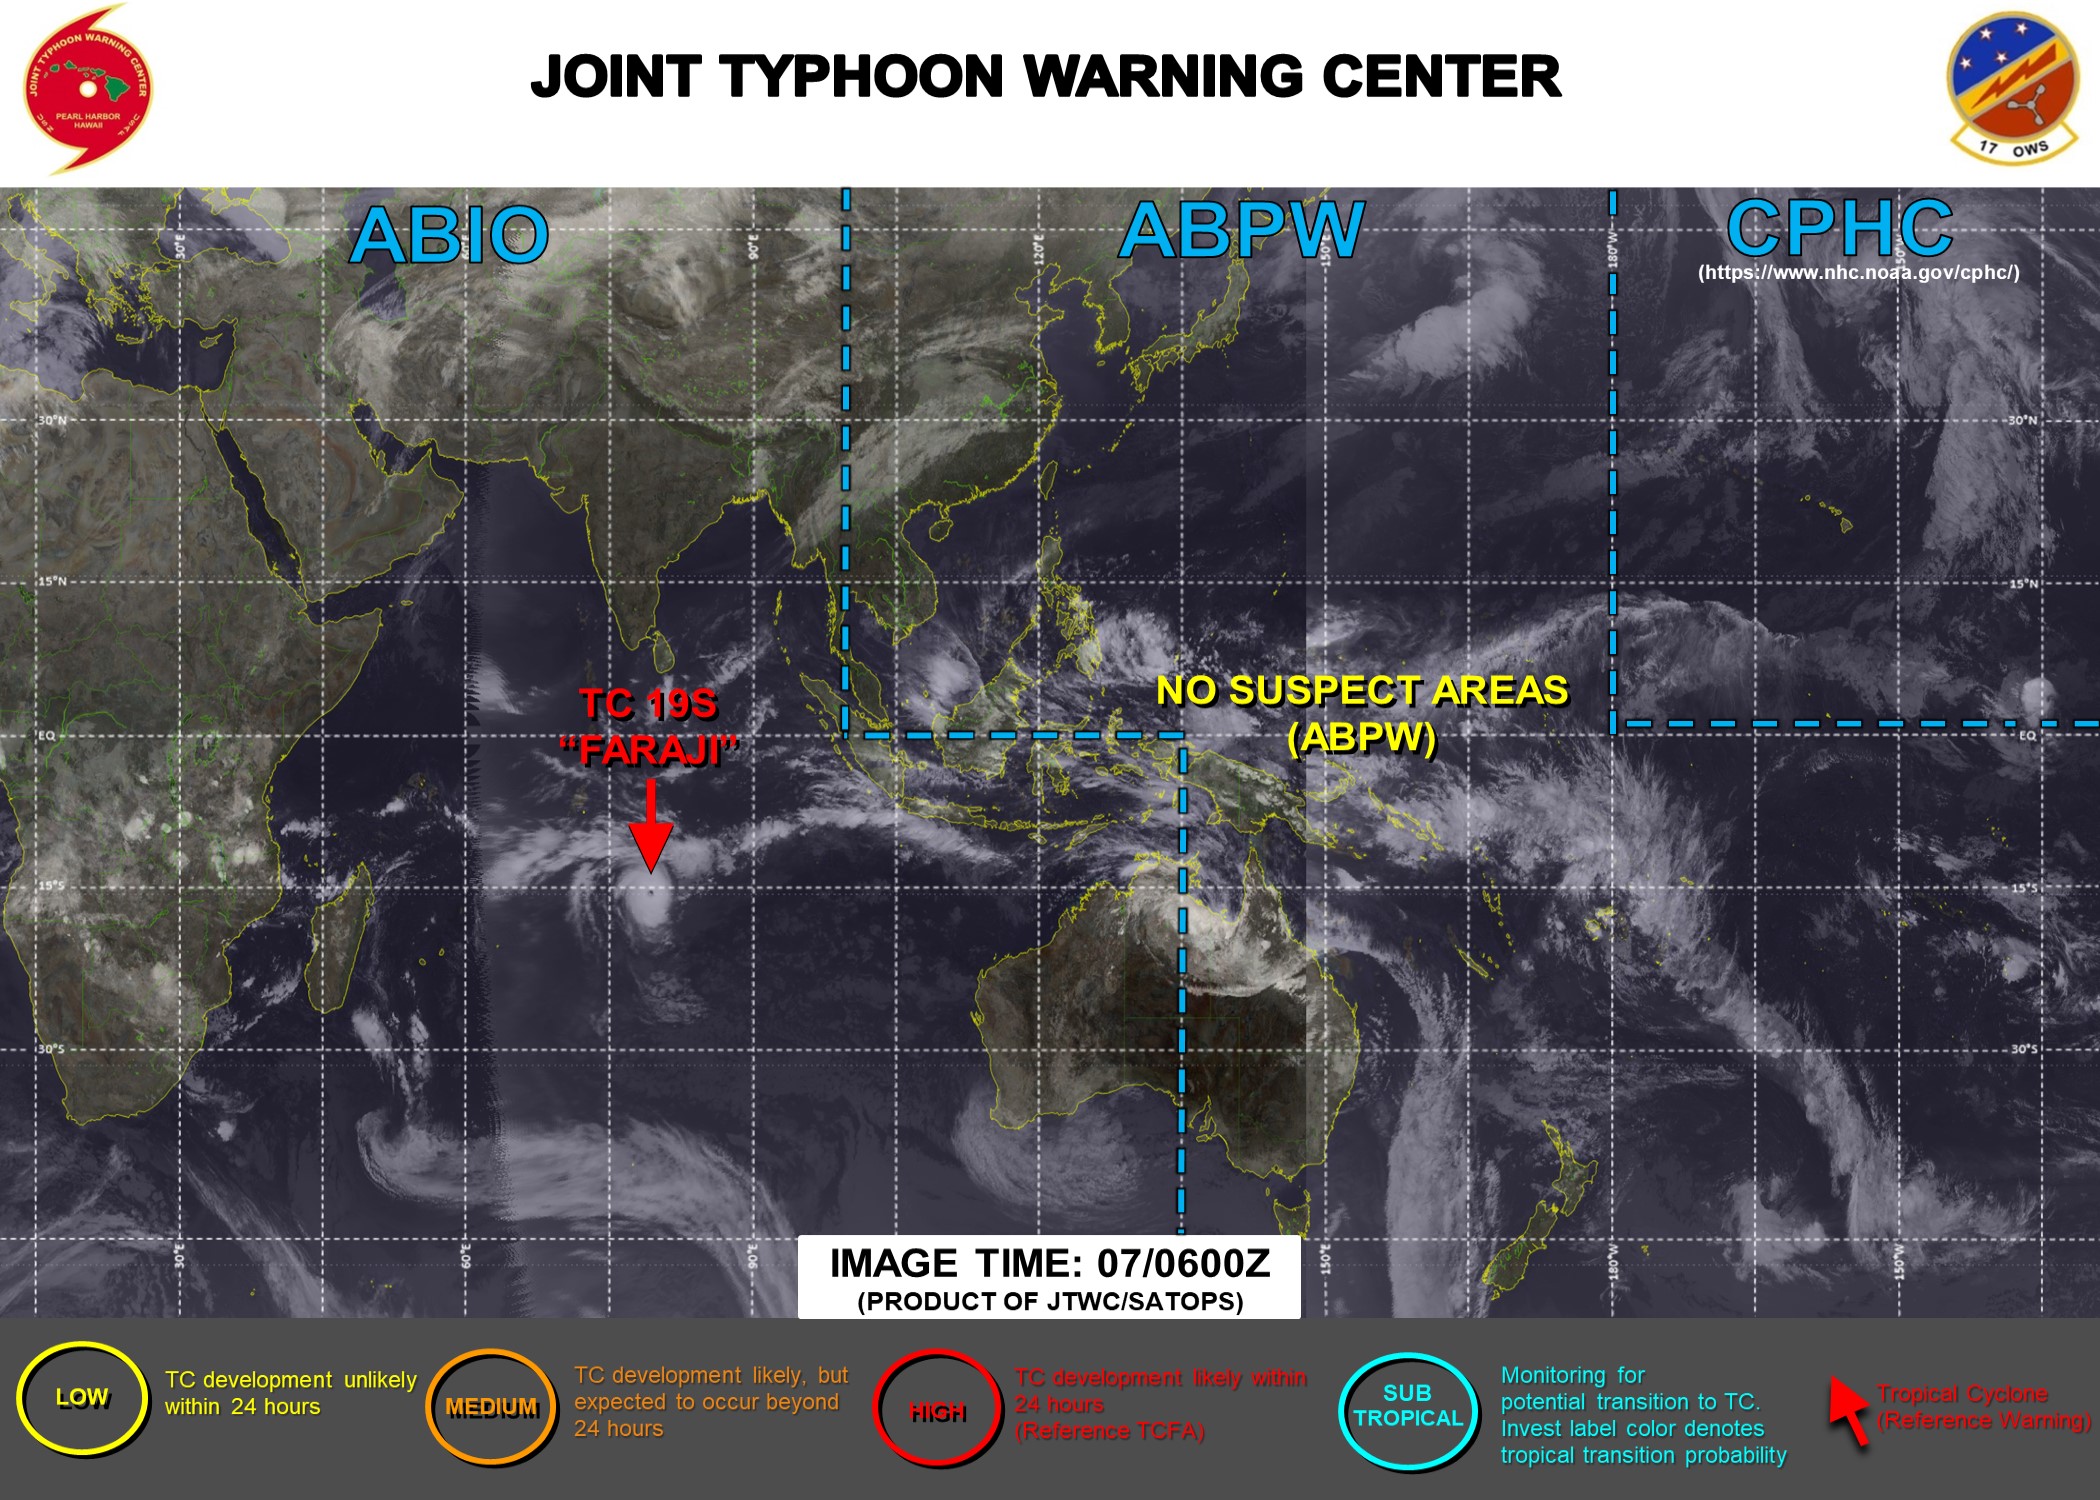 07/06UTC. JTWC IS ISSUING 12HOURLY WARNINGS ON TC 19S(FARAJI). 3 HOURLY SATELLITE BULLETINS ARE PROVIDED FOR 19S WHEREAS THEY WERE DISCONTINUED FOR INVEST 91P AT 07/0230UTC.